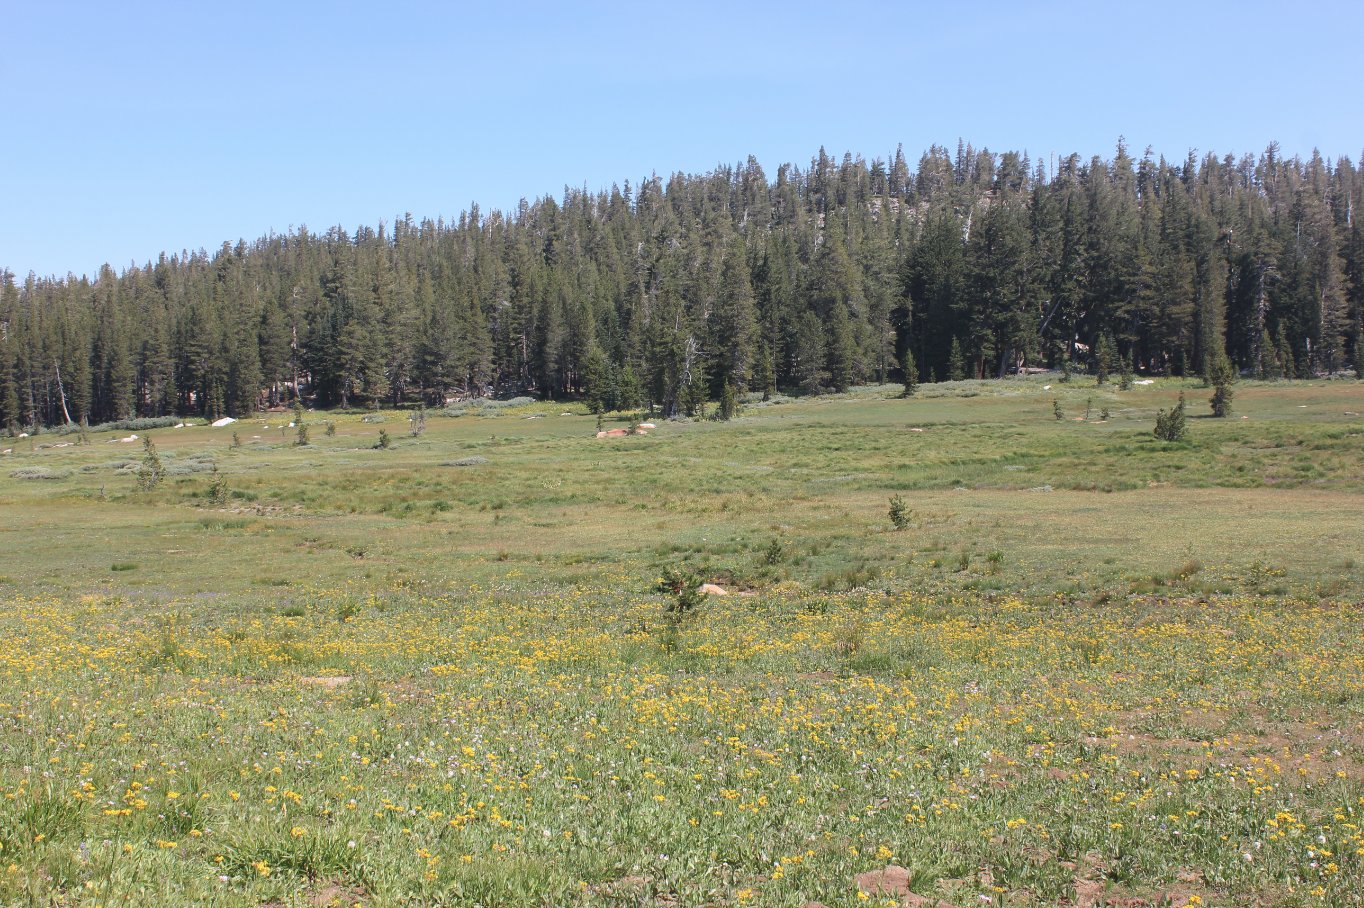 Unnamed meadow